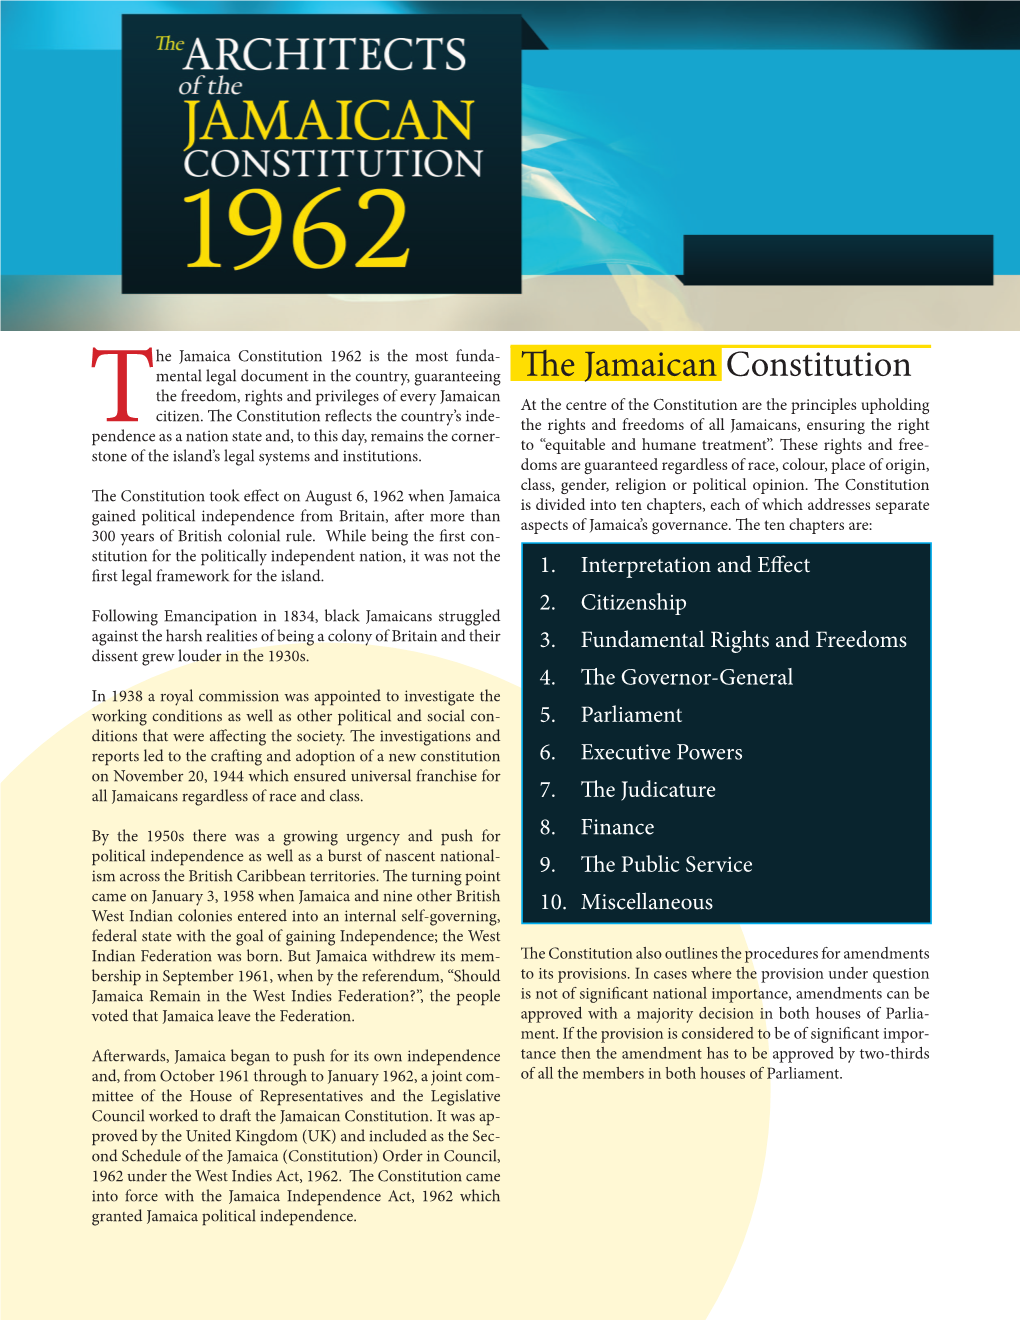 The Architects of the Jamaican Constitution